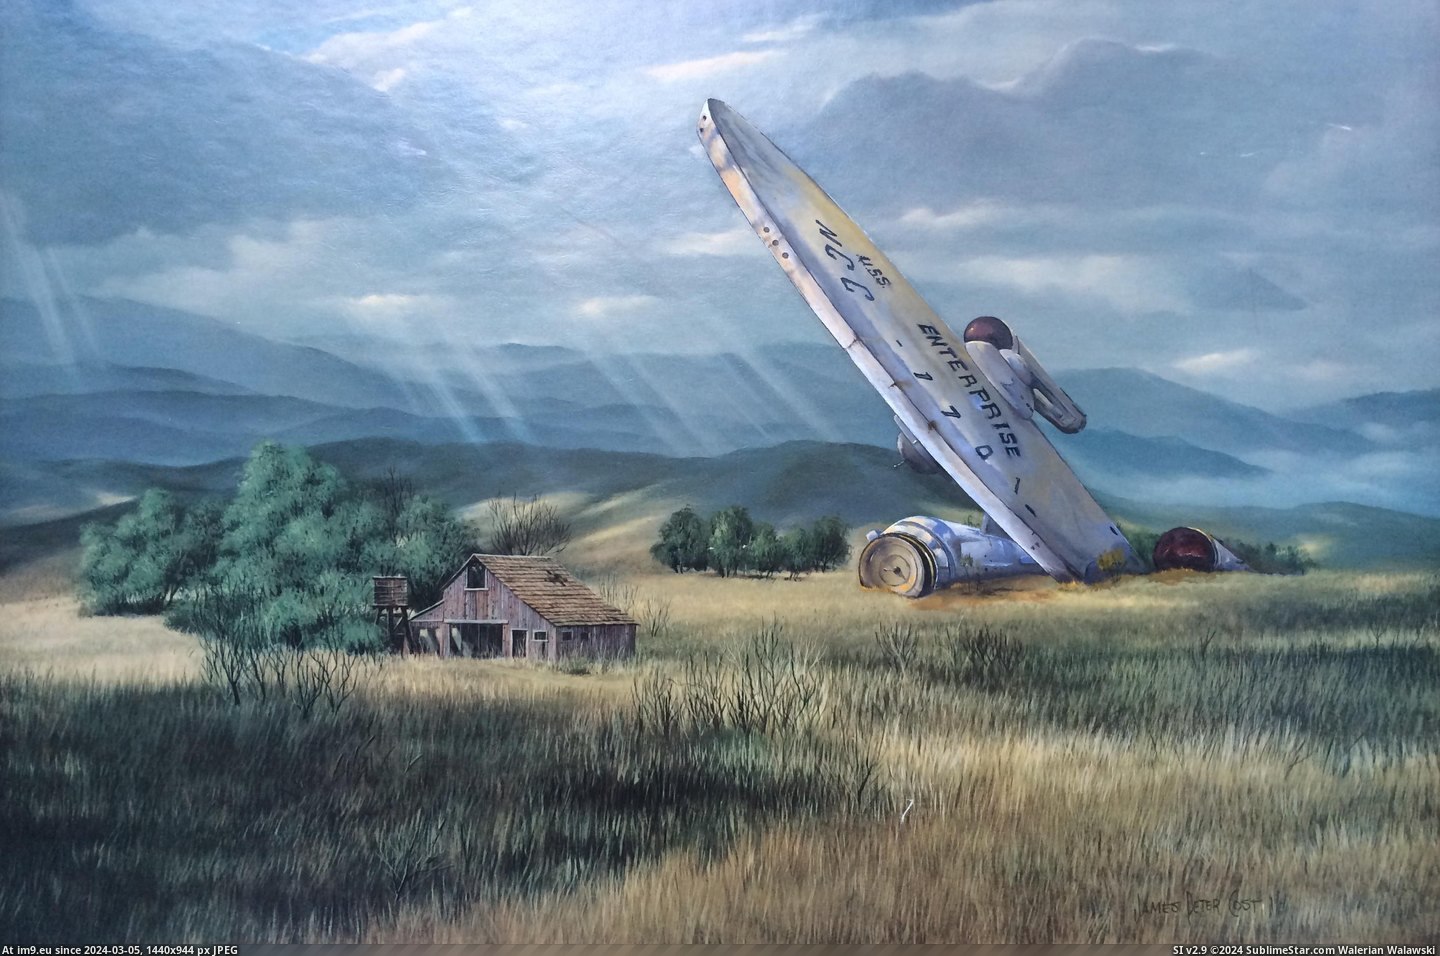 #Old #Painting #Hope #Print #Enterprise #Finished #Enjoys #Thrift [Pics] I just finished painting the Enterprise into this old thrift print. Hope reddit enjoys 'First Contact' Pic. (Изображение из альбом My r/PICS favs))